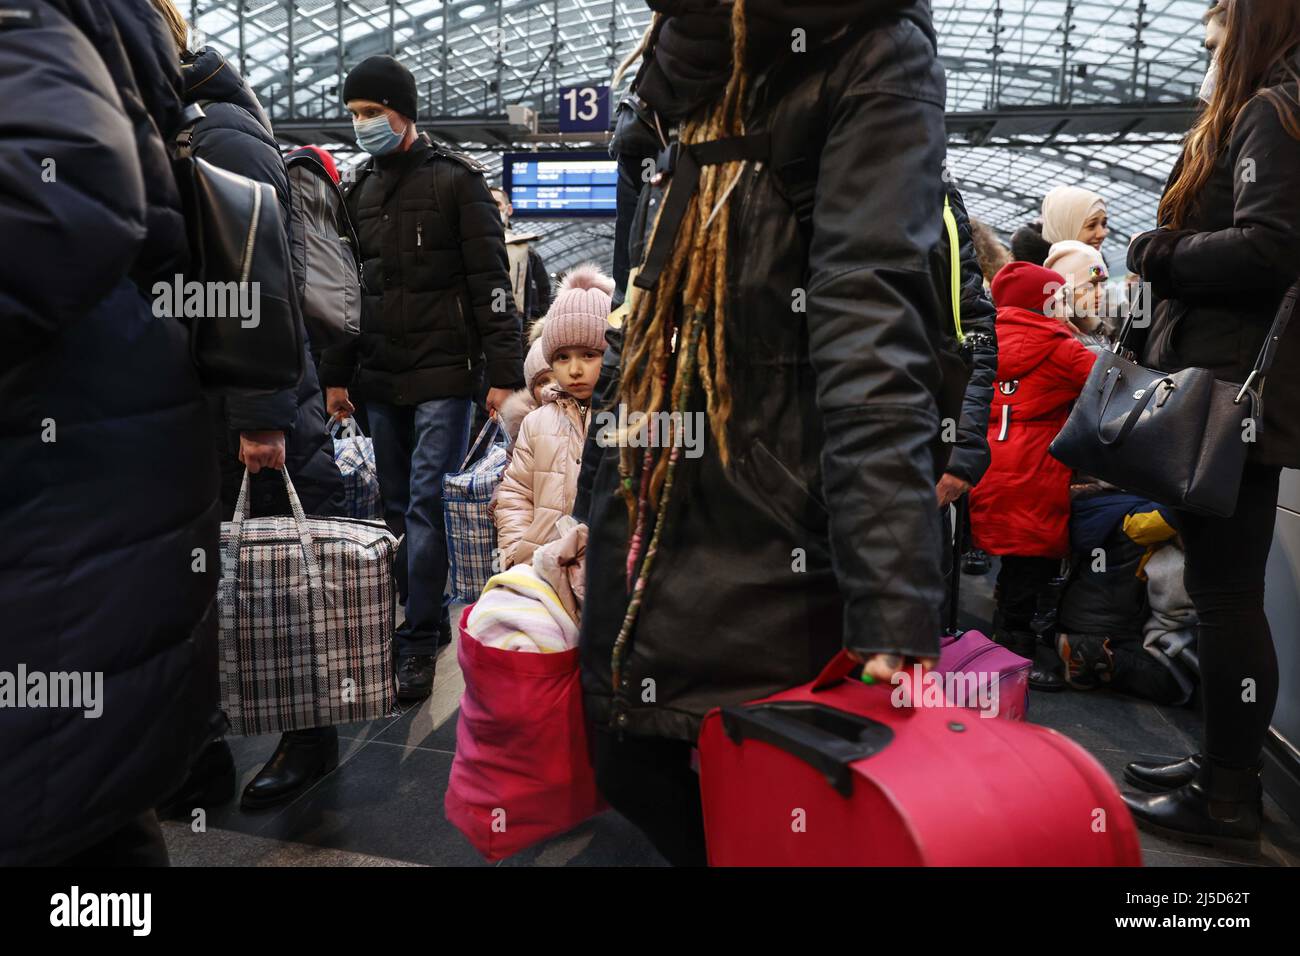 Berlin, 03.03.2022 - Refugees from Ukraine arrive with their children at Berlin Central Station. Thousands of refugees from Ukraine have already arrived in Germany. [automated translation] Stock Photo